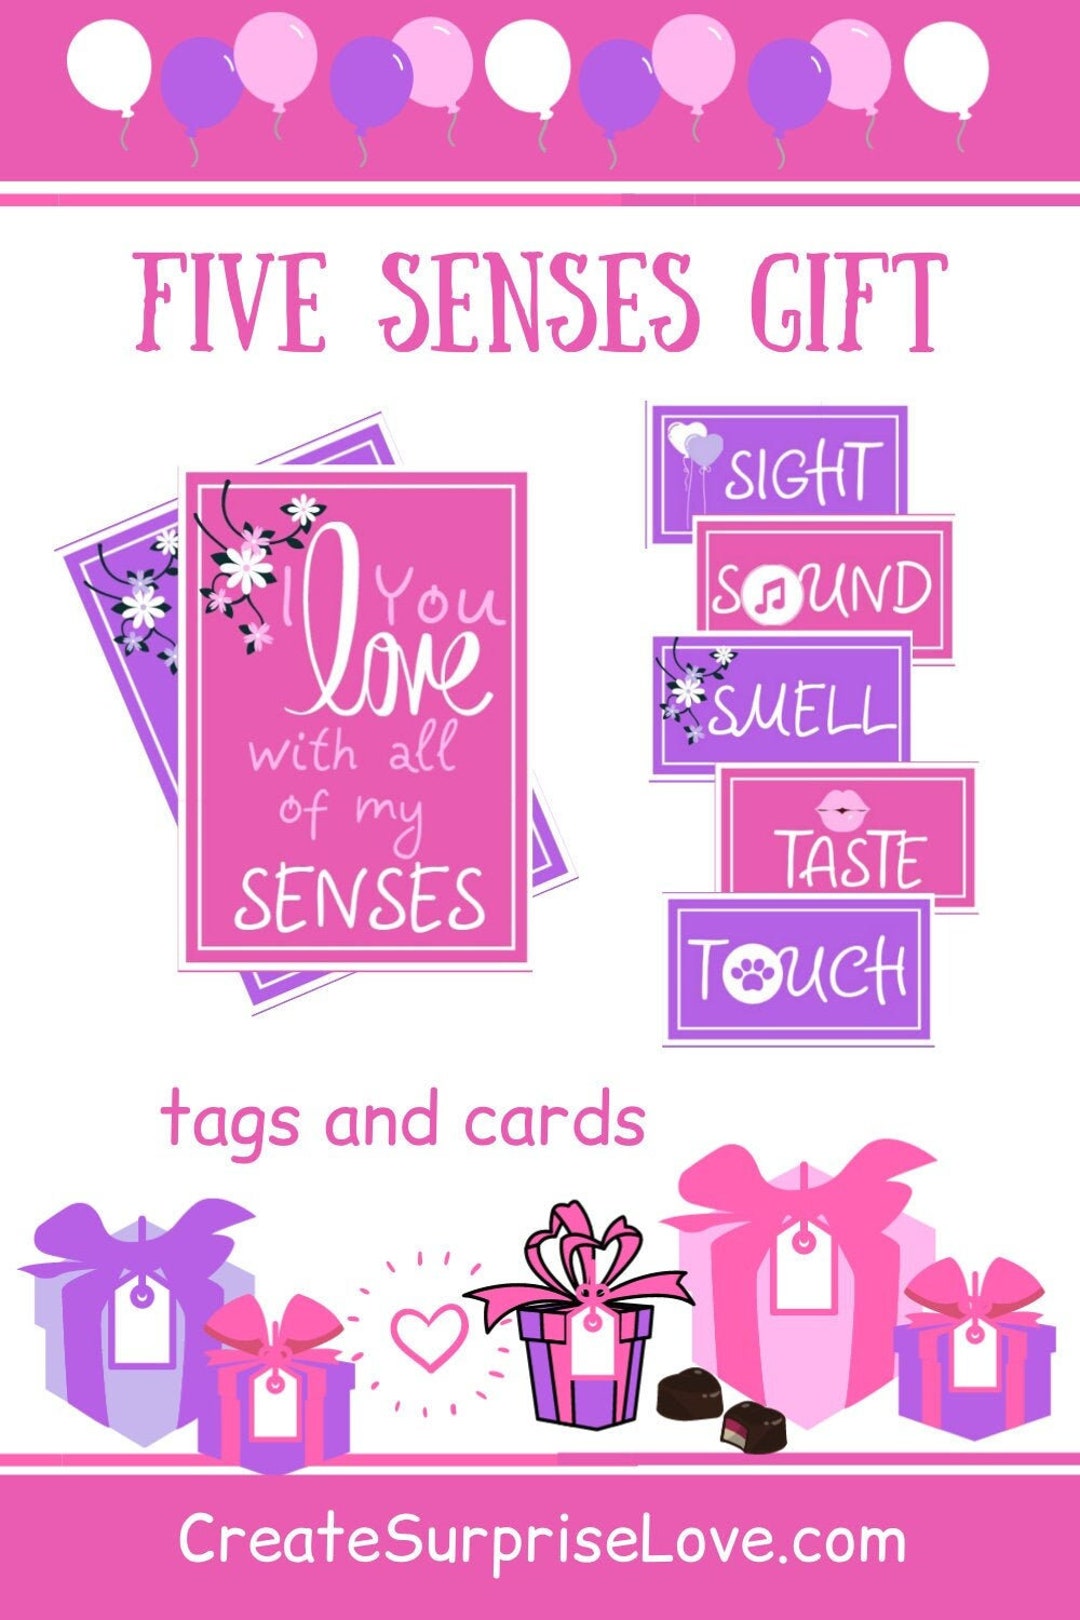 5 Senses Gift Tags Romantic Gifts for Her 1st Anniversary Gift